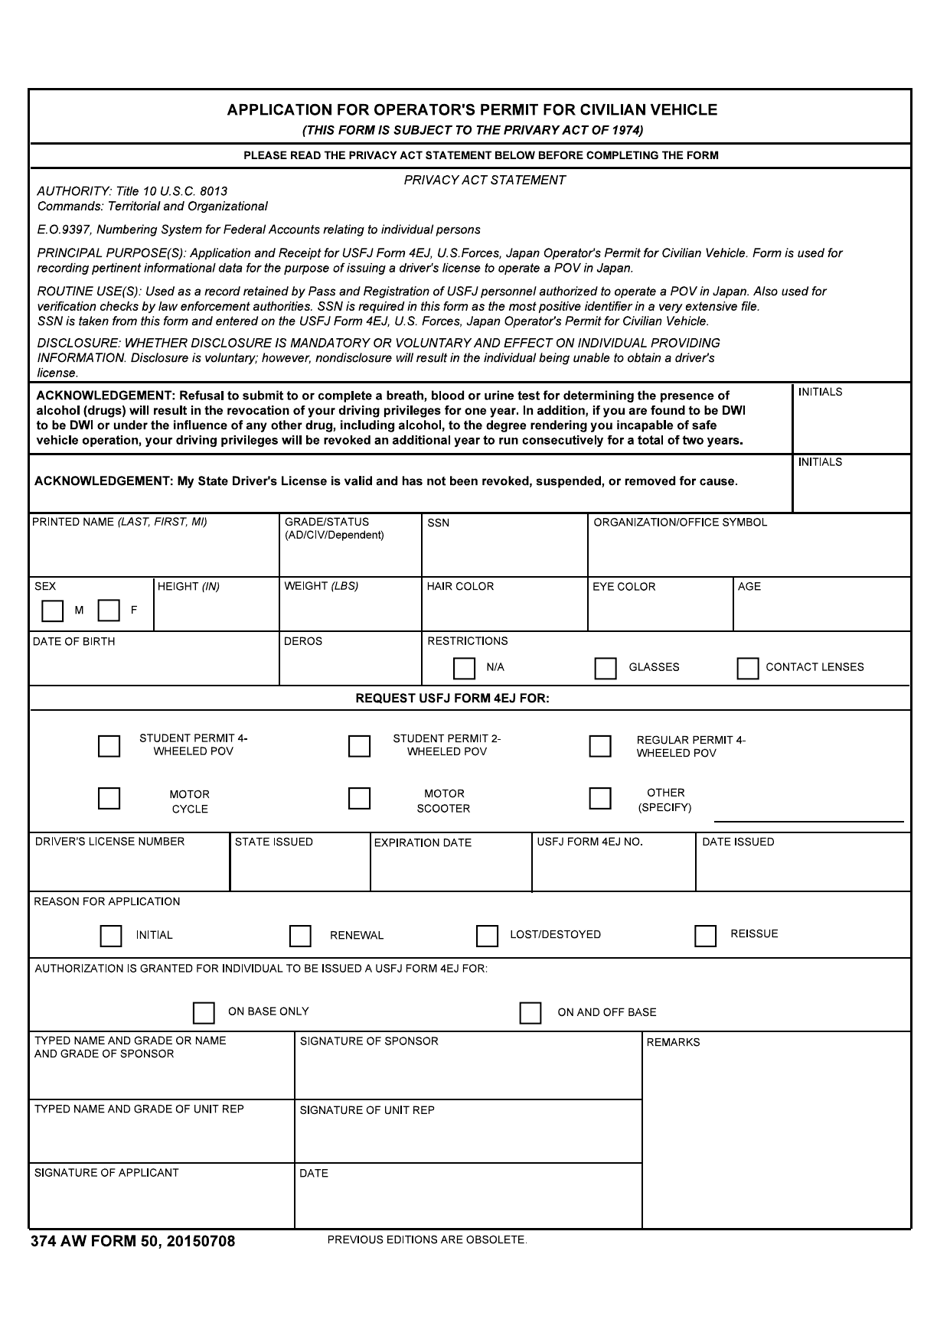 374 AW Form 50 Application for Operators Permit for Civilian Vehicle, Page 1